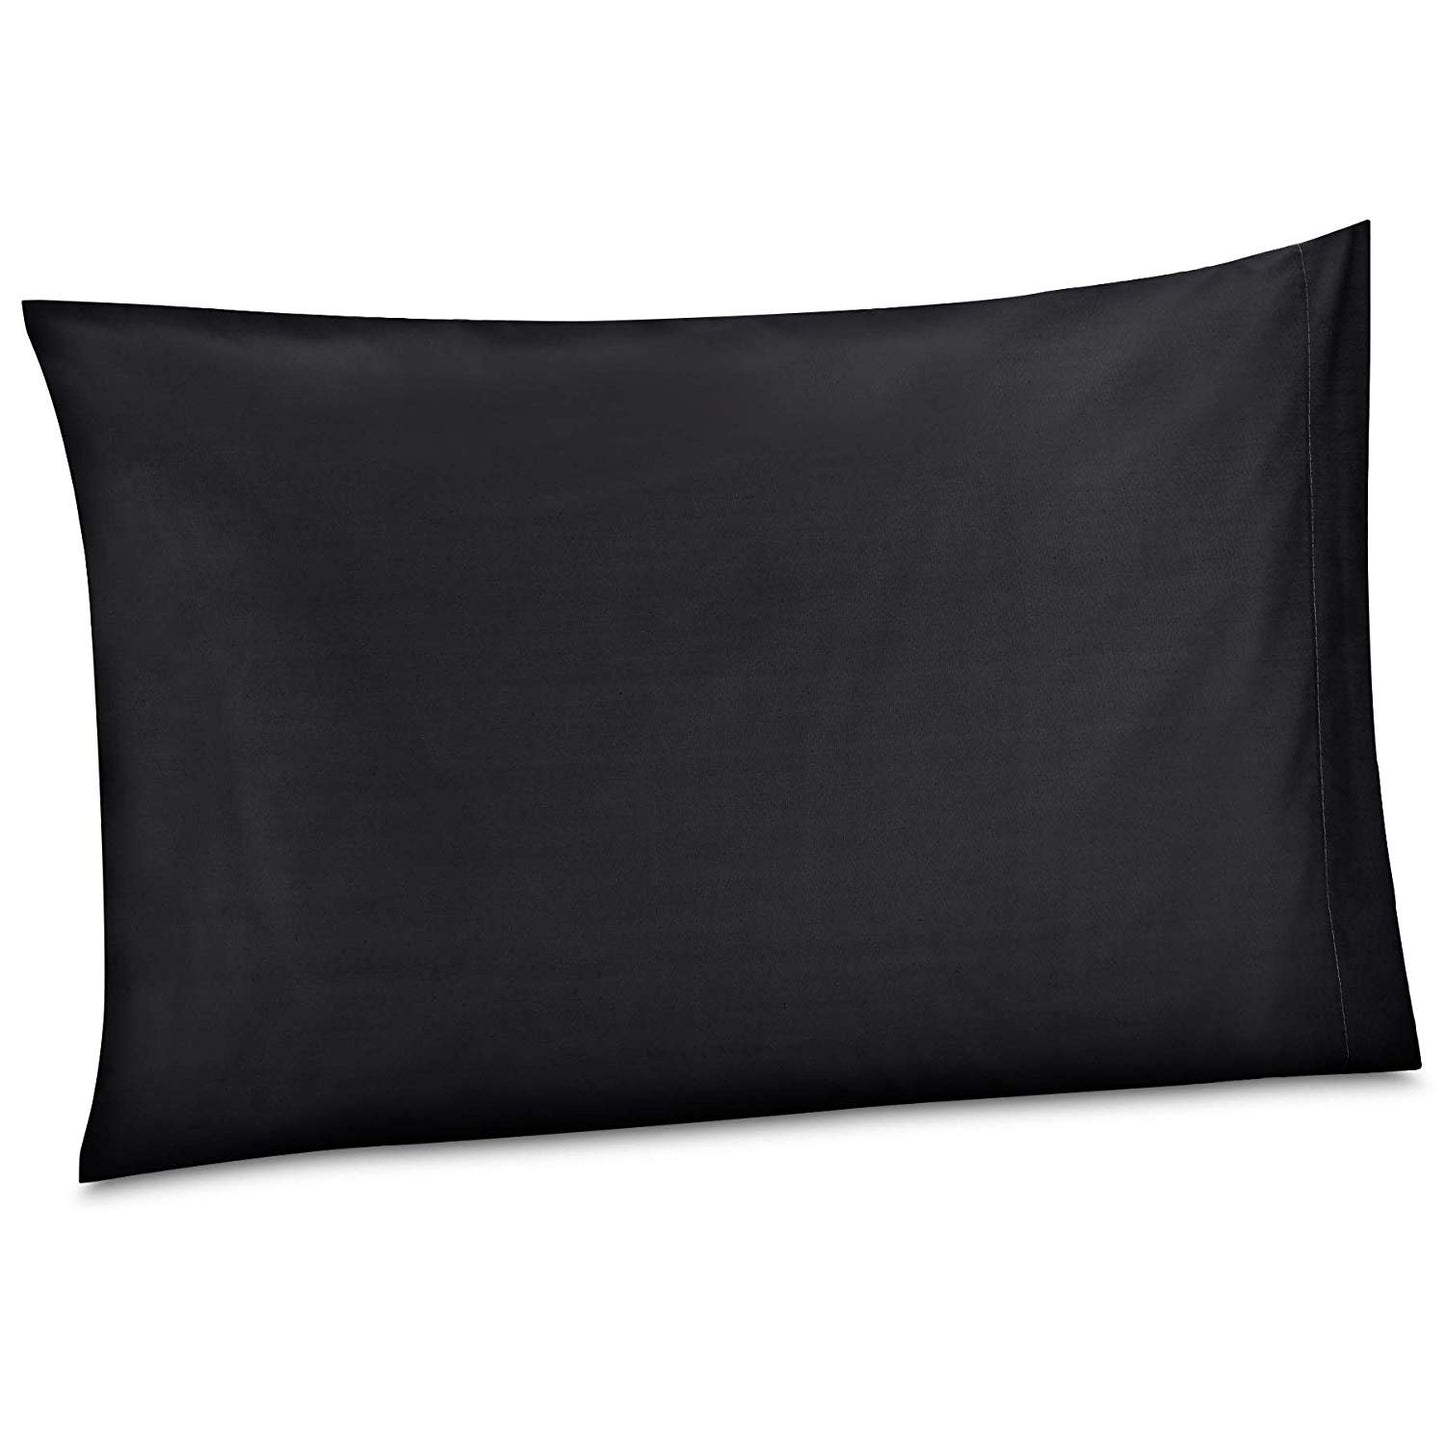 Gilbin 100% Cotton/Percale 210 Thread Count Pillow Cases Set of 2 Standard Soft Black Home Cotton Pillow Cover for Sleeping-Bedroom Pillowcases